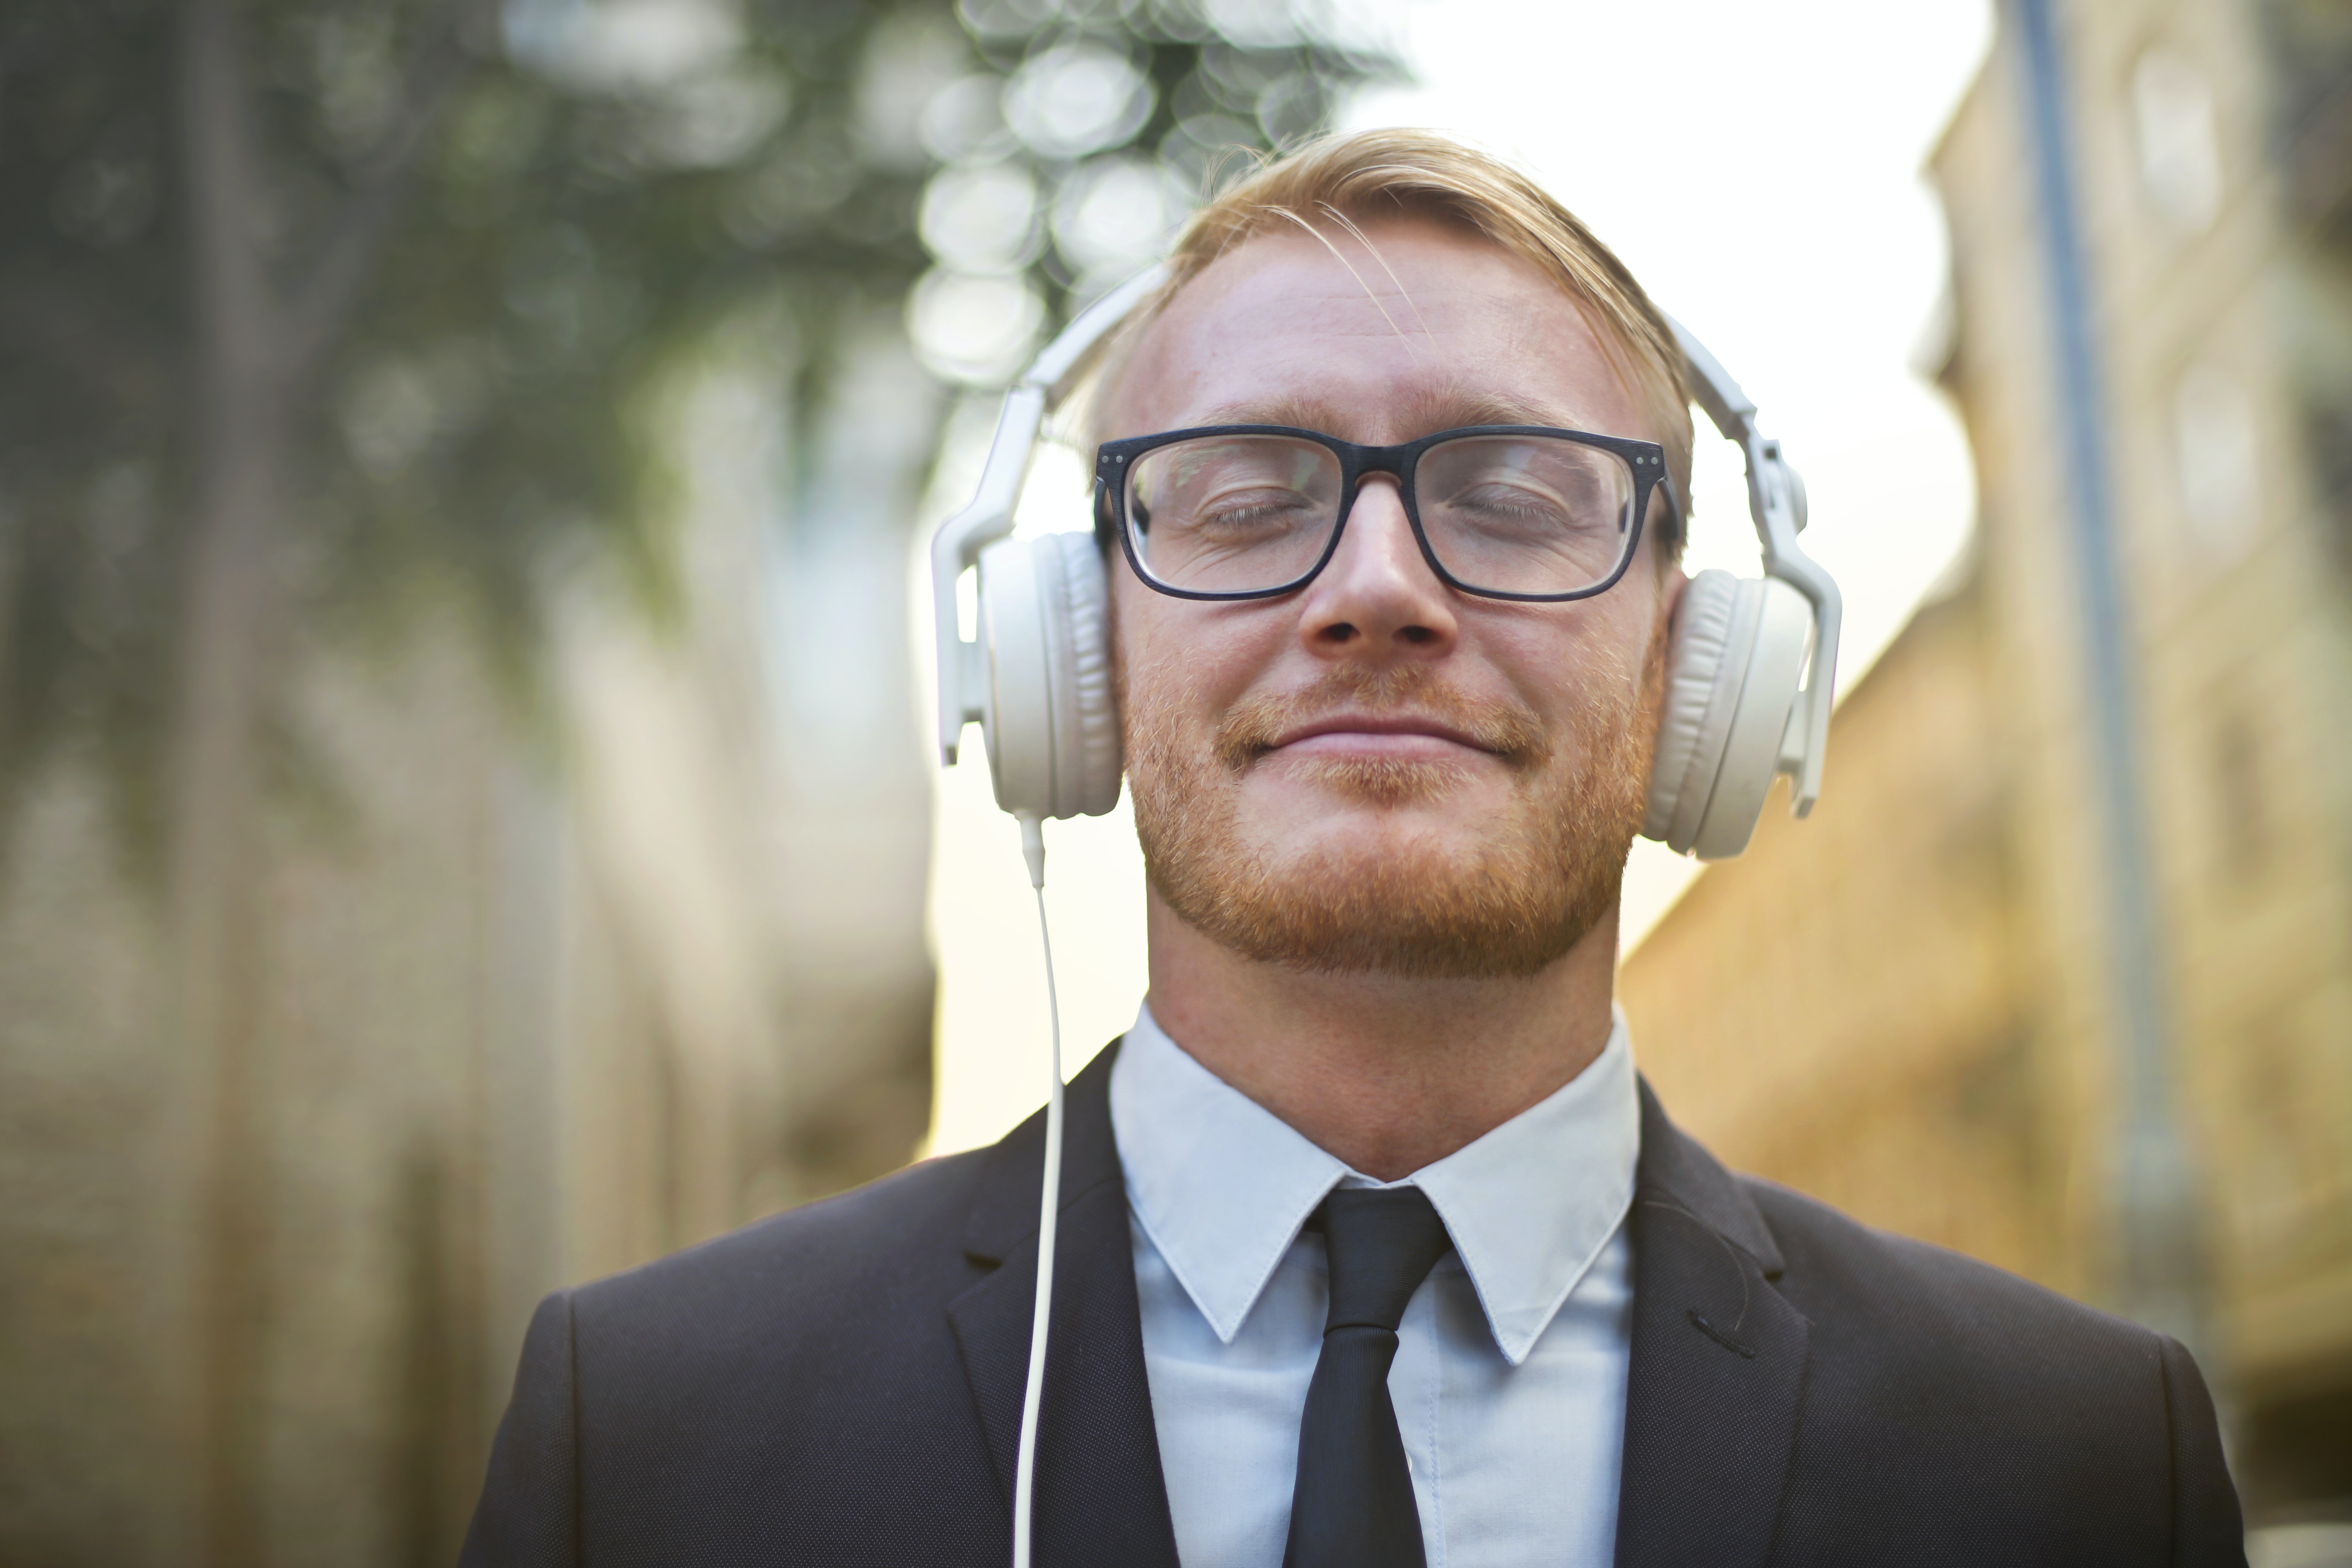 Listening to music can help settle uncomfortable or difficult moods